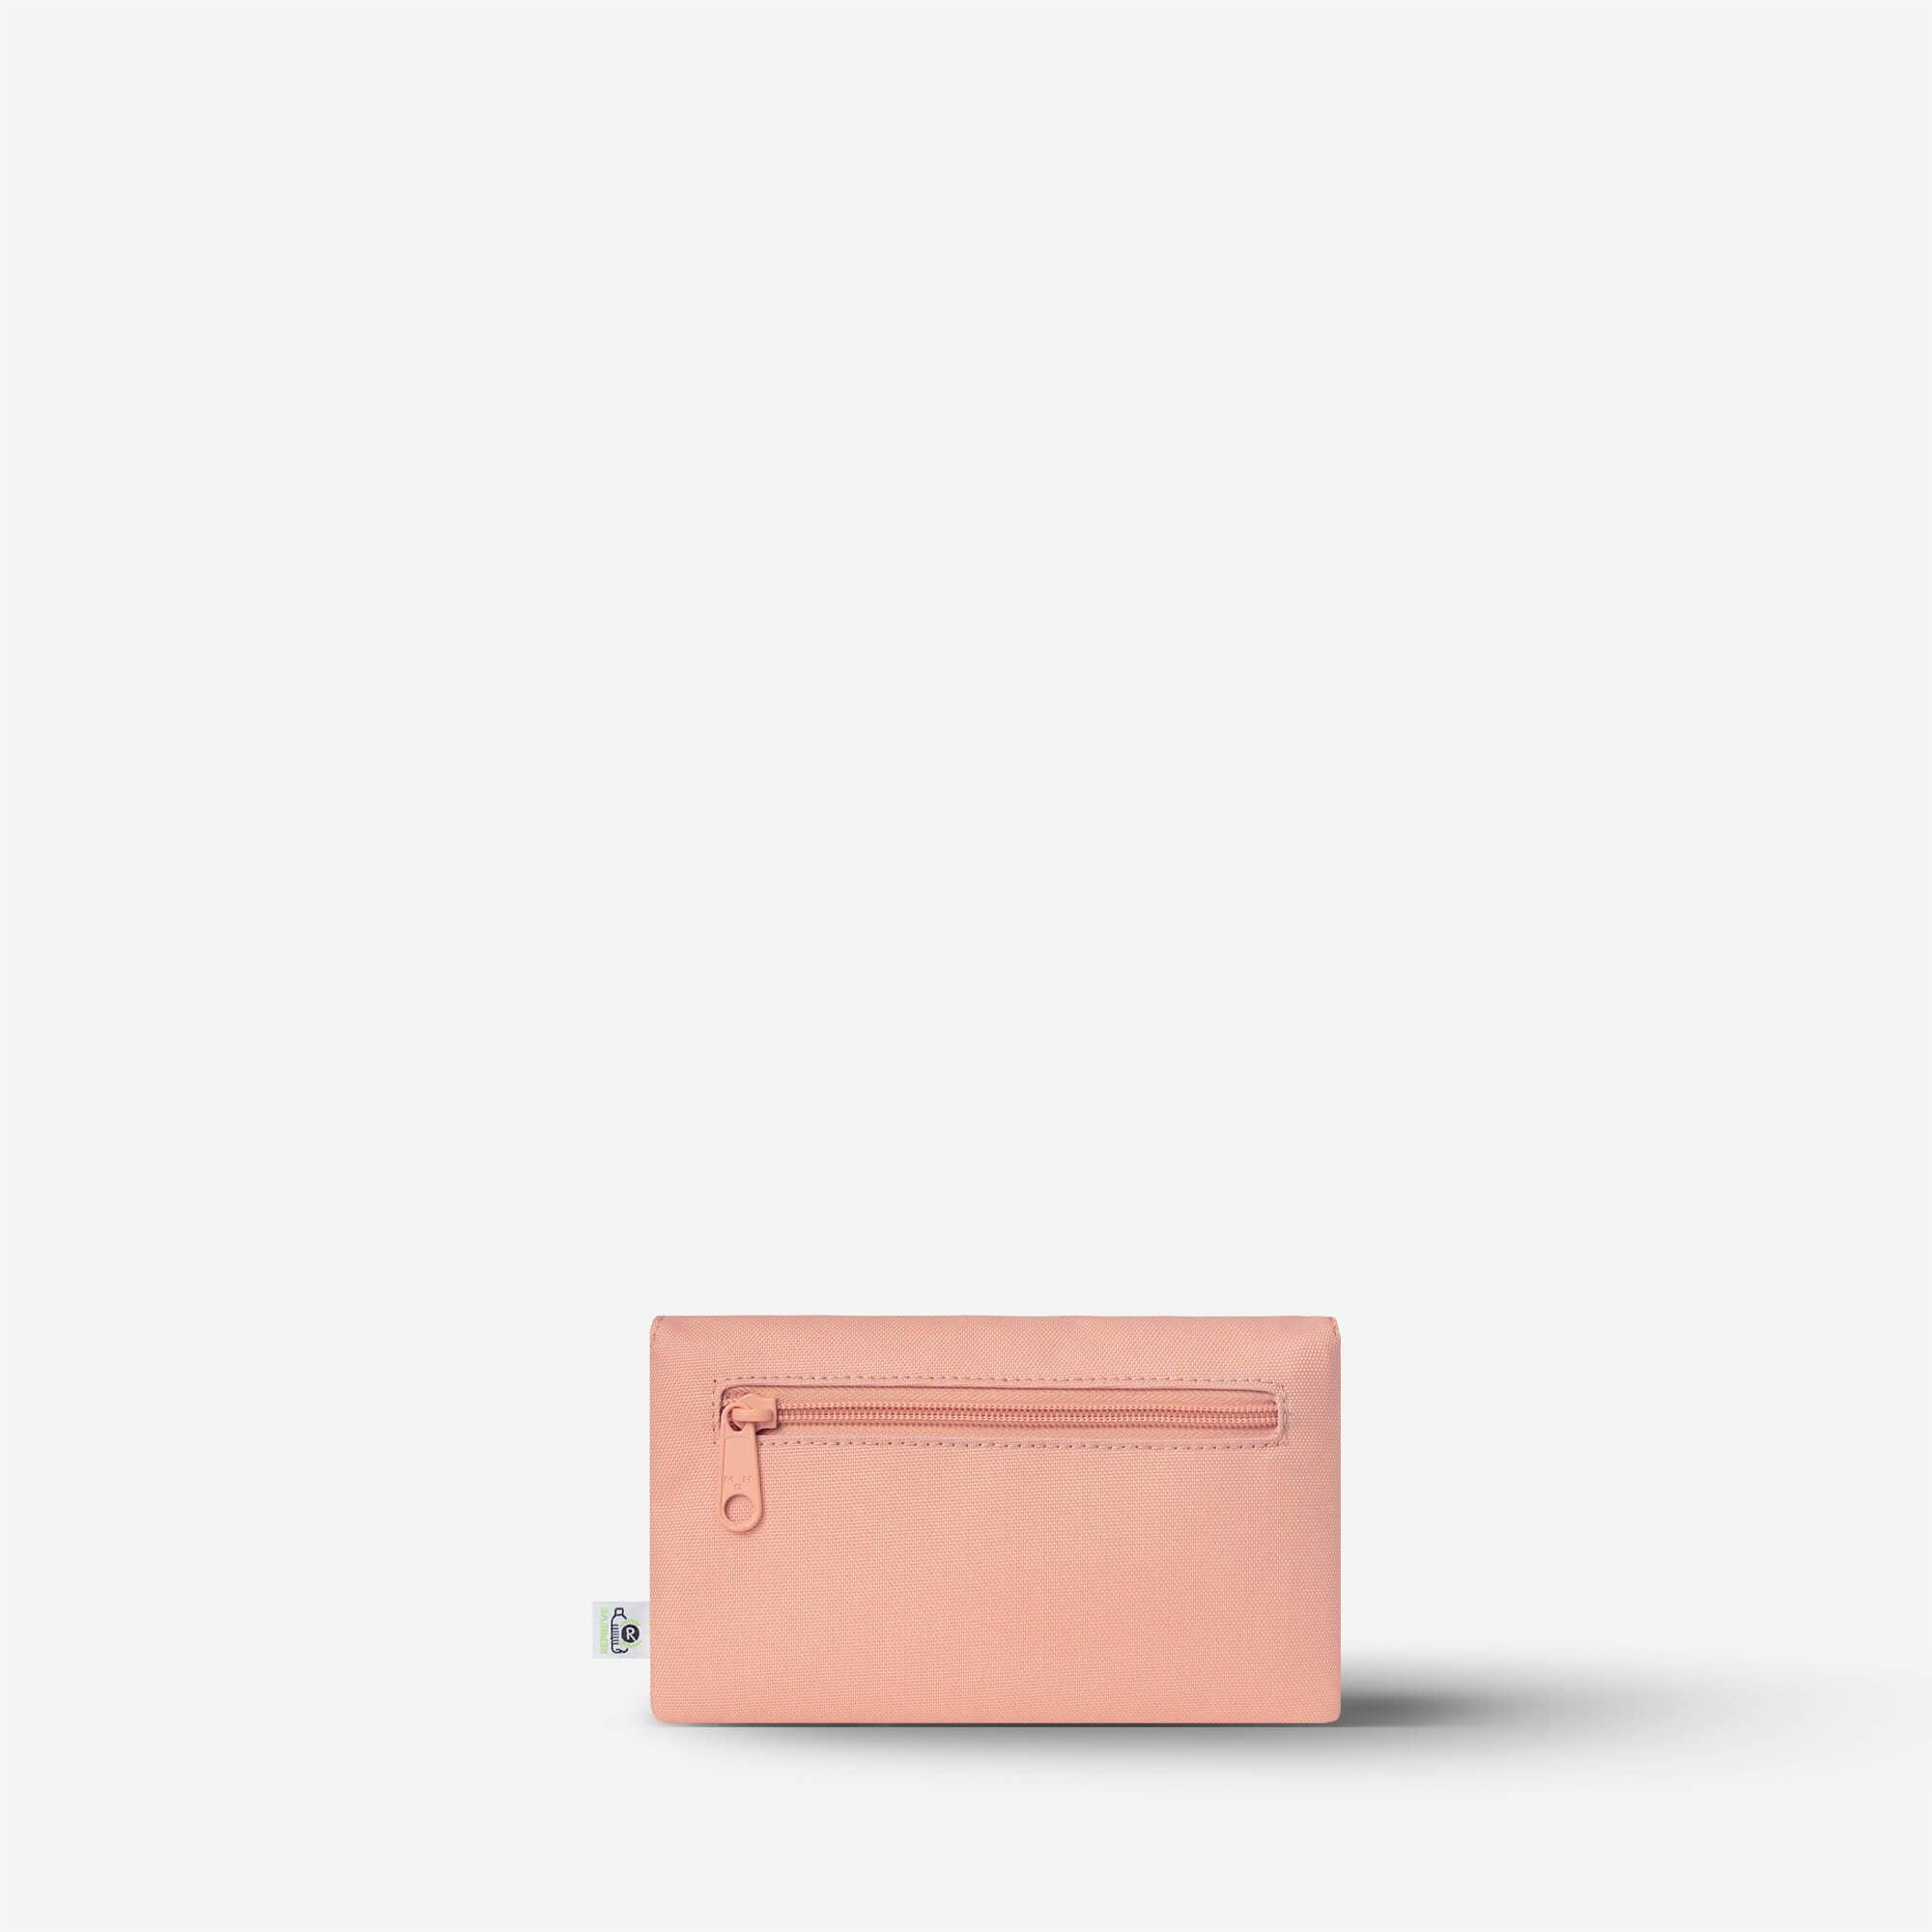 MaH Canvas Pencil Case For Girls - Pink